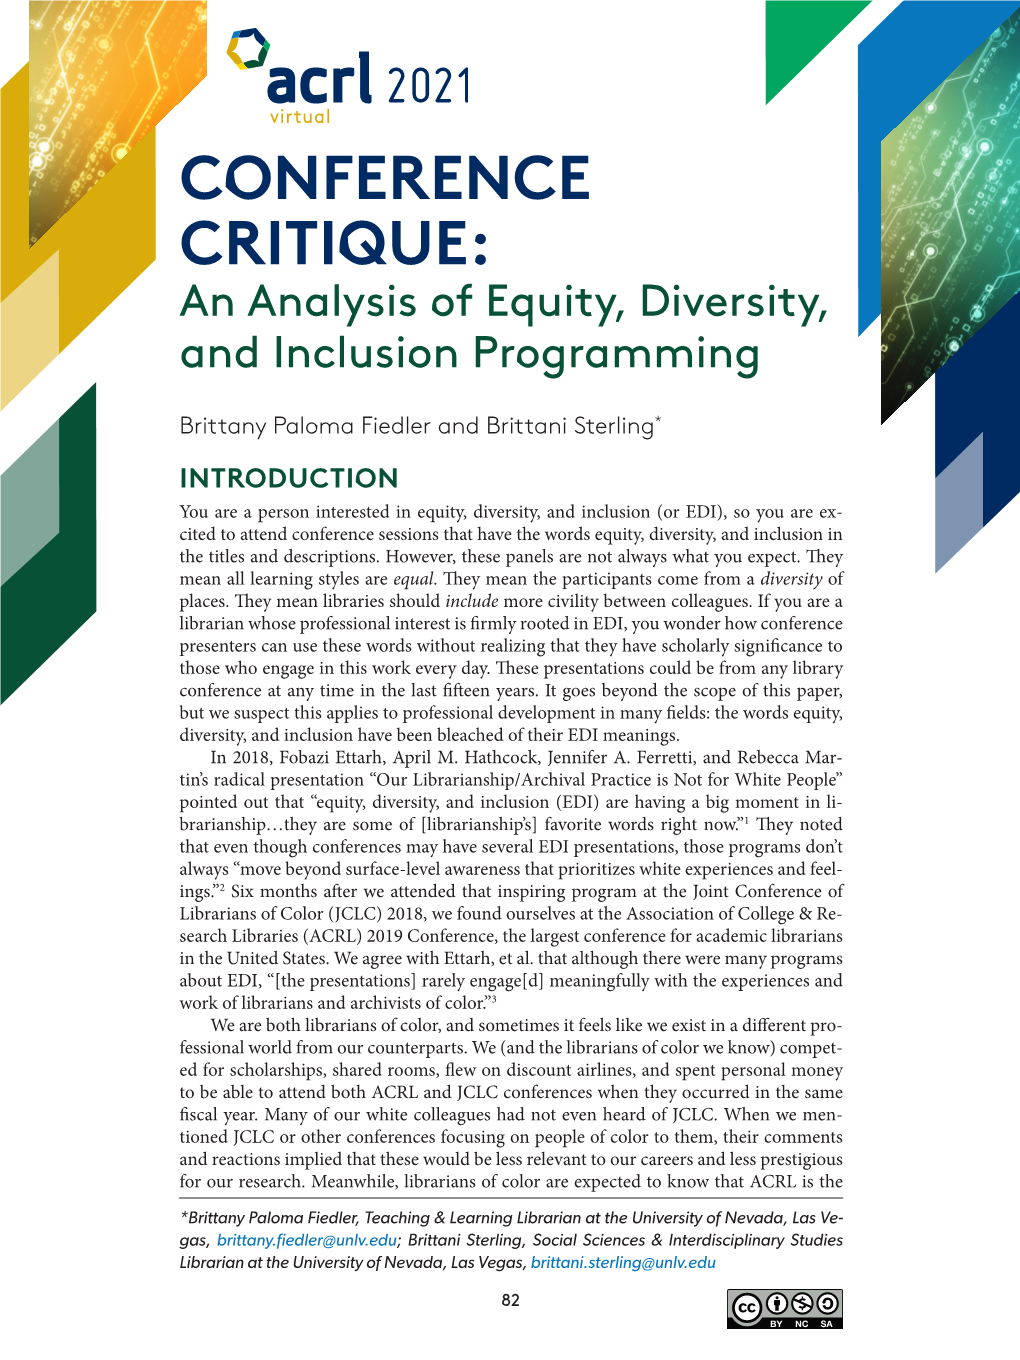 An Analysis of Equity, Diversity, and Inclusion Programming